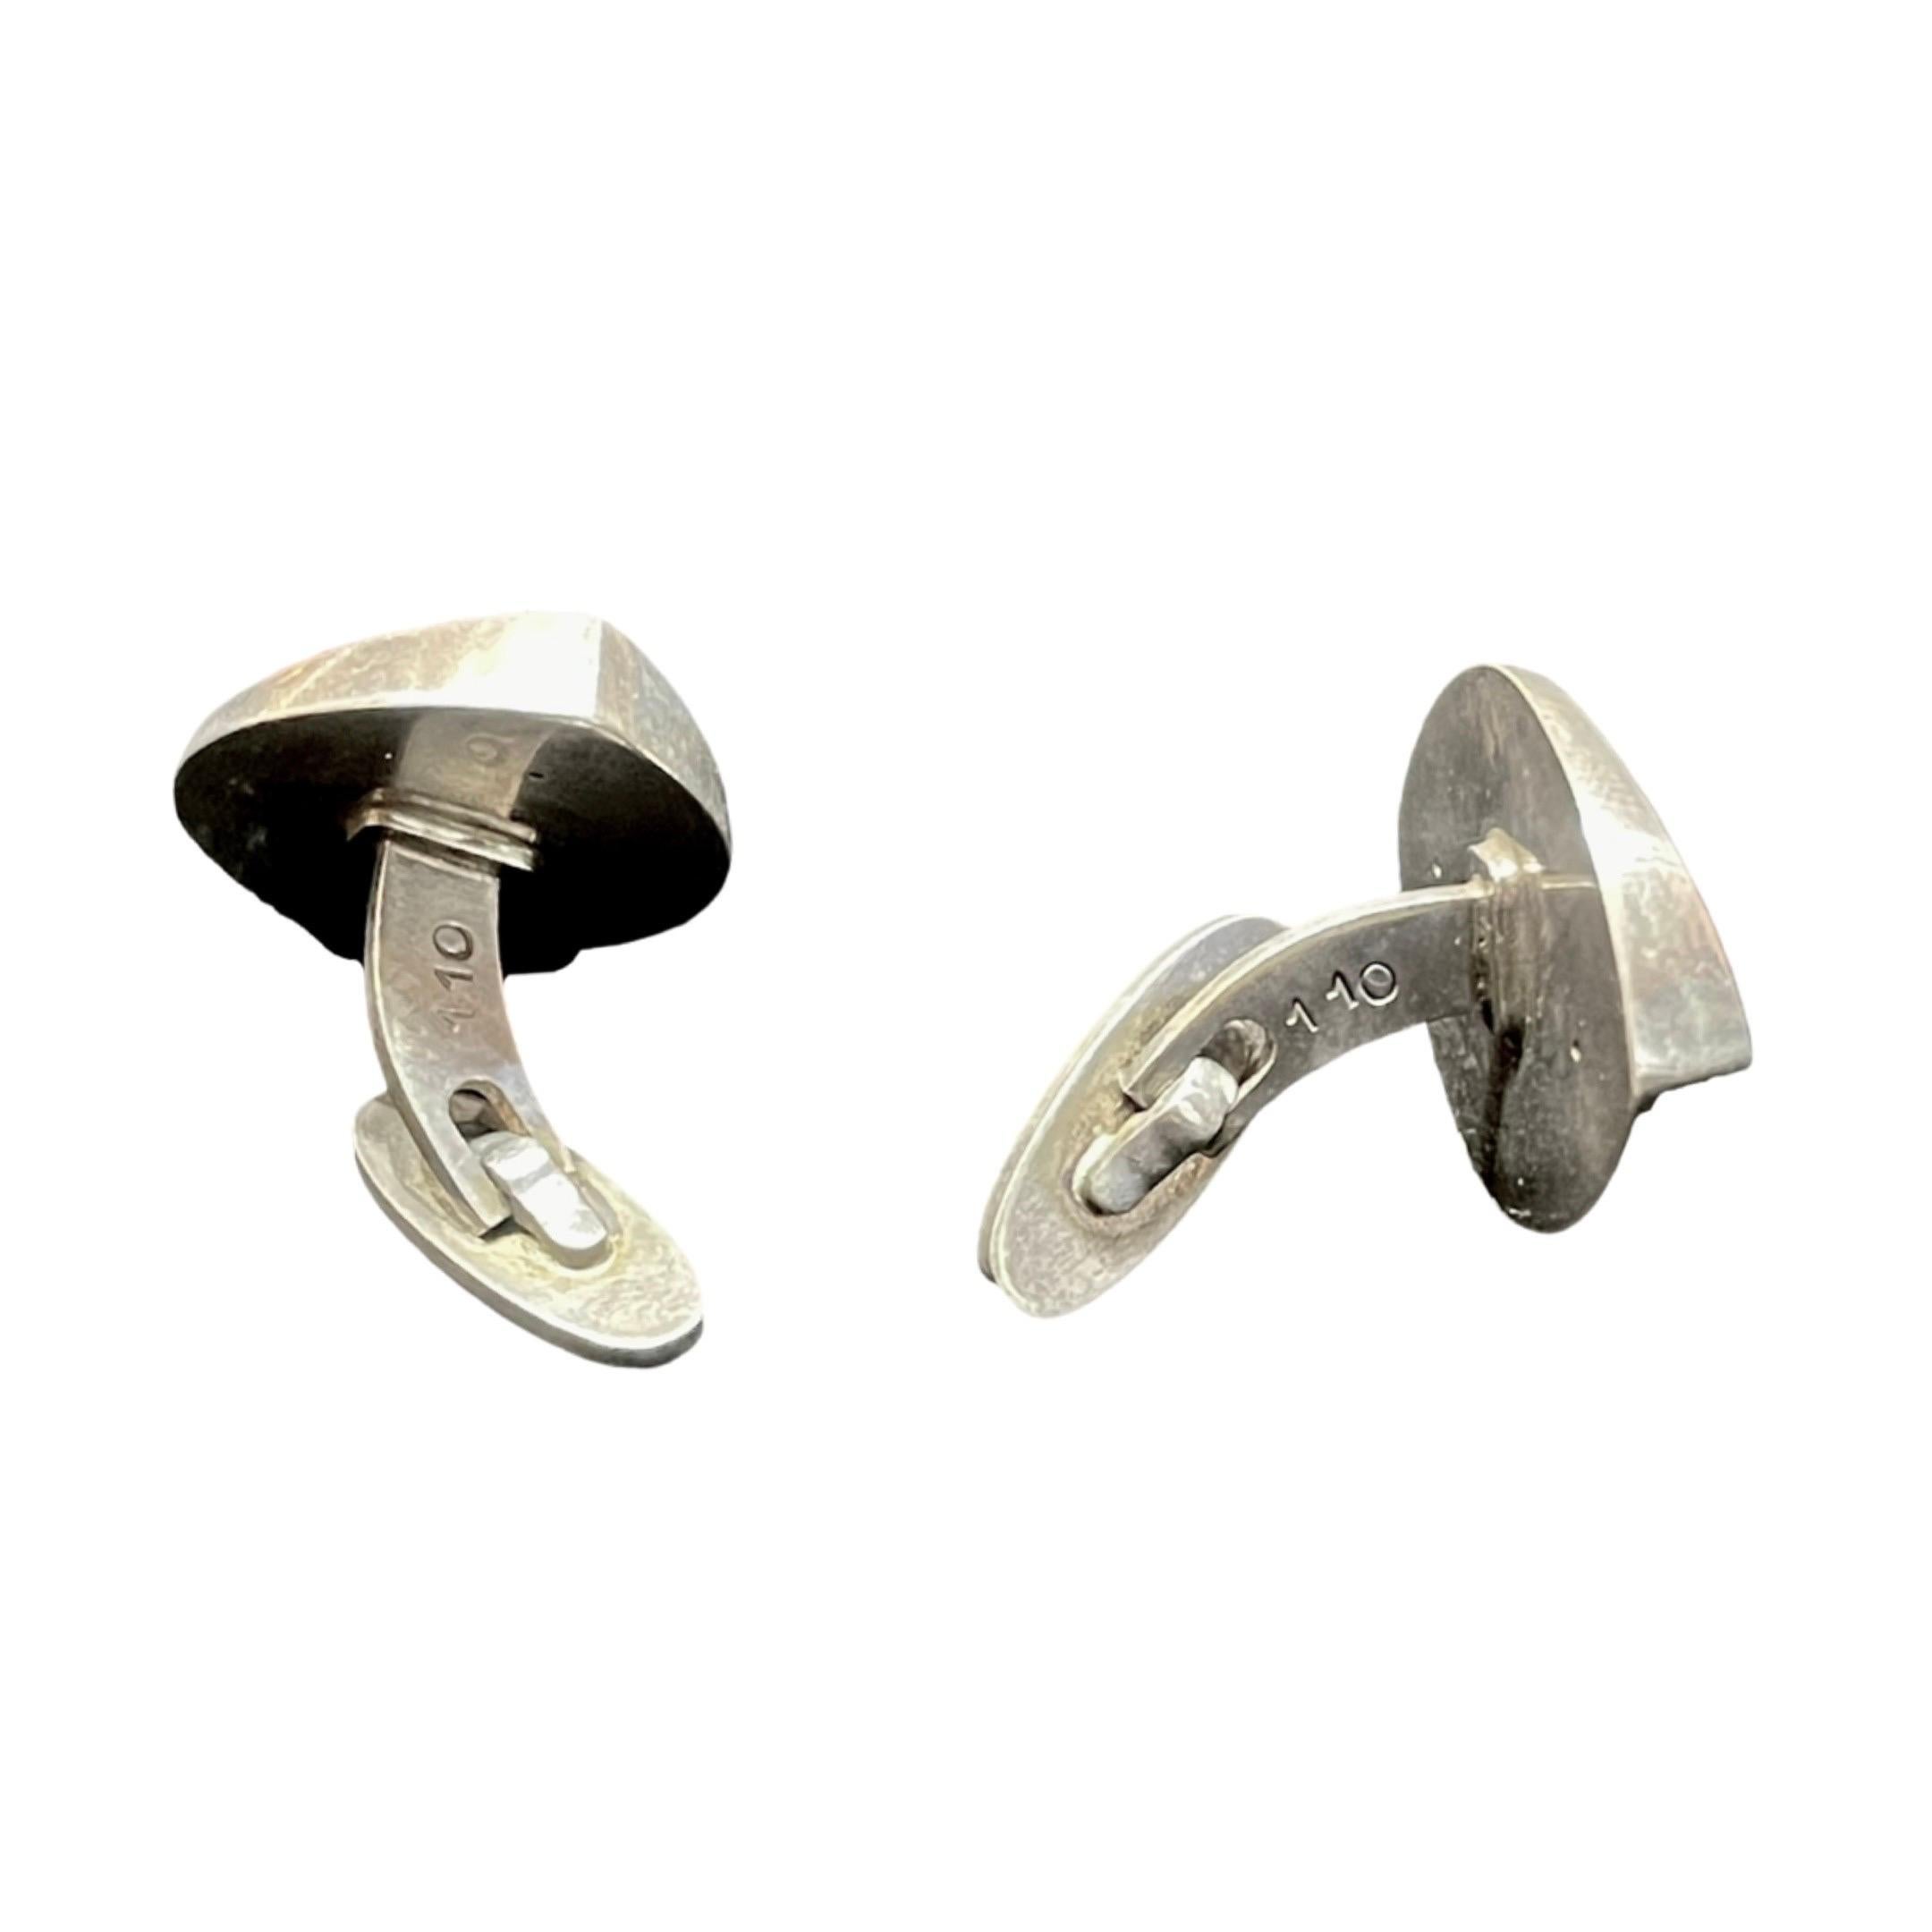 We have a stunning pair of Georg Jensen Sterling Silver Modernist oval-shaped cufflinks in pattern number 110 that are rare and beautiful. Nanna Ditzel designed these cufflinks in the 1960s, and this particular design was made in various sizes, with